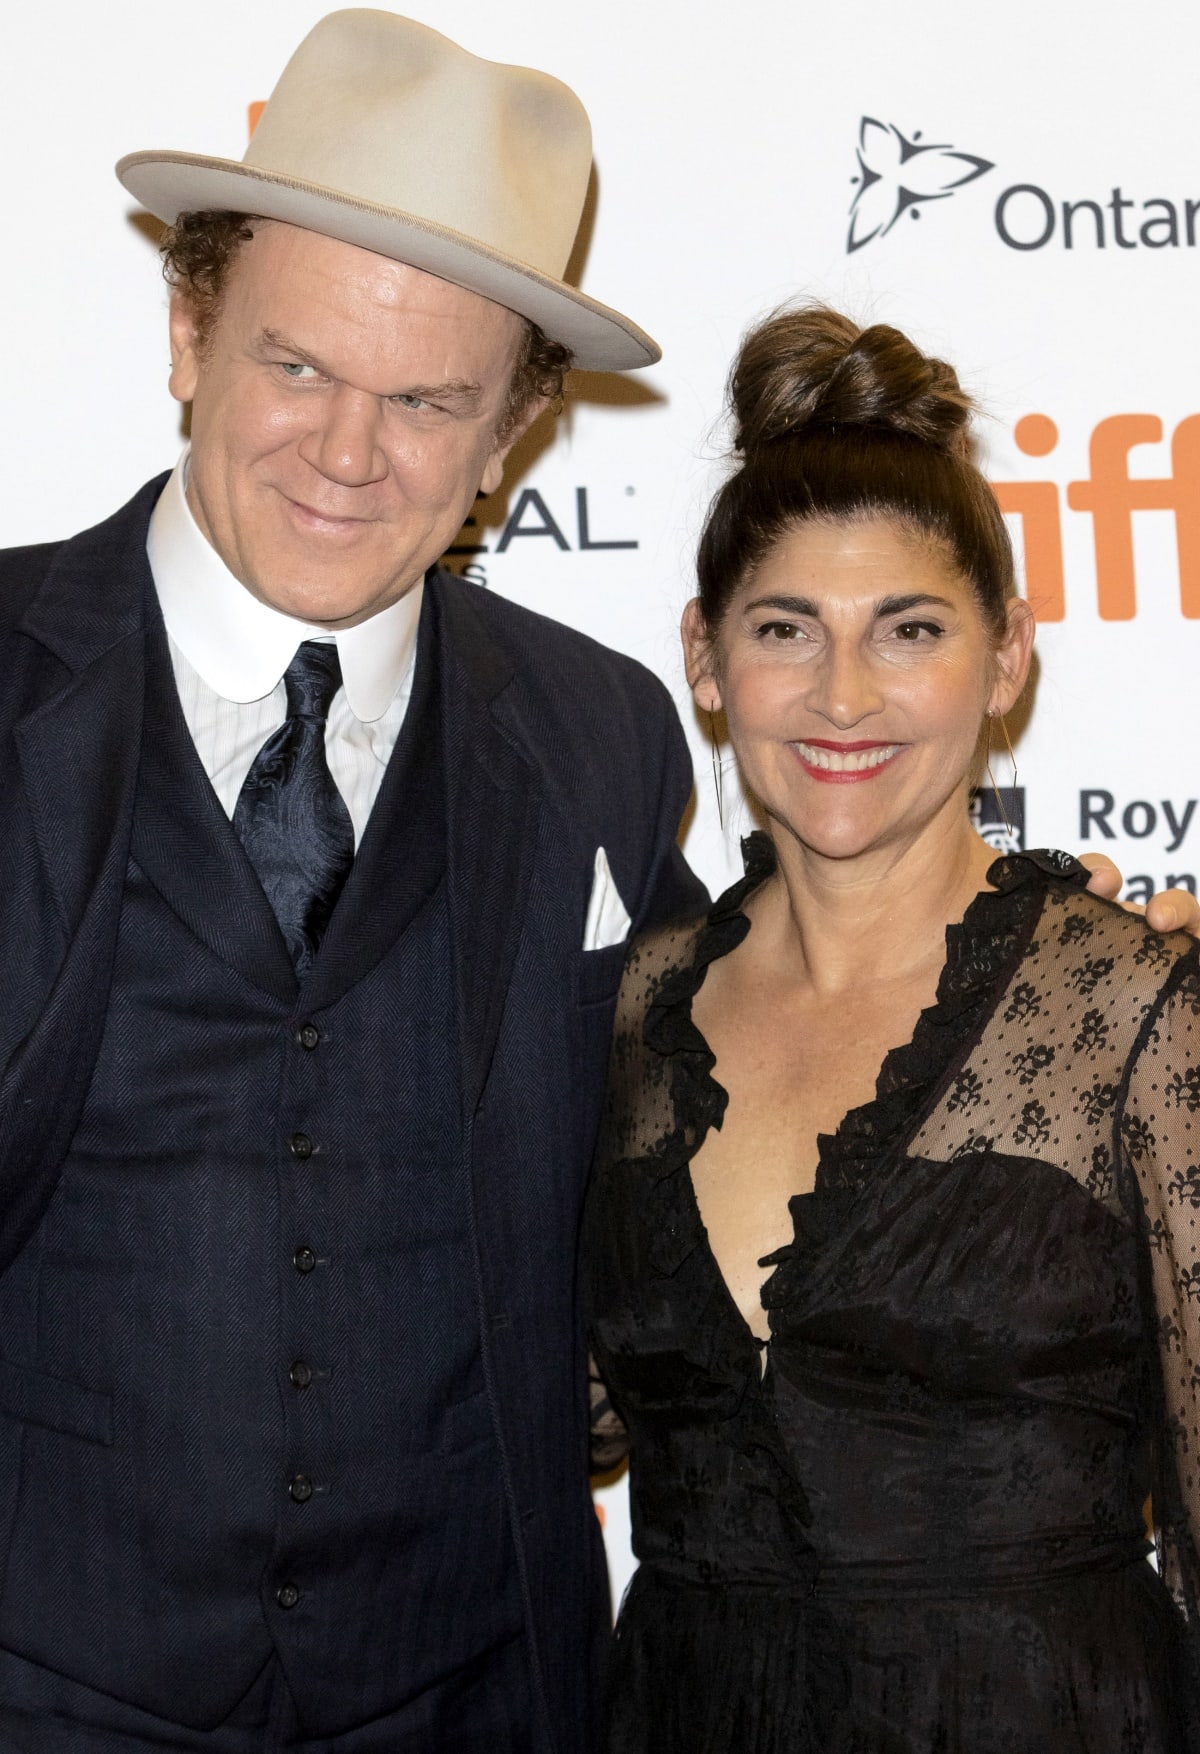 John C. Reilly and Alison Dickey were all smiles at the premiere of The Sisters Brothers during the Toronto Film Festival